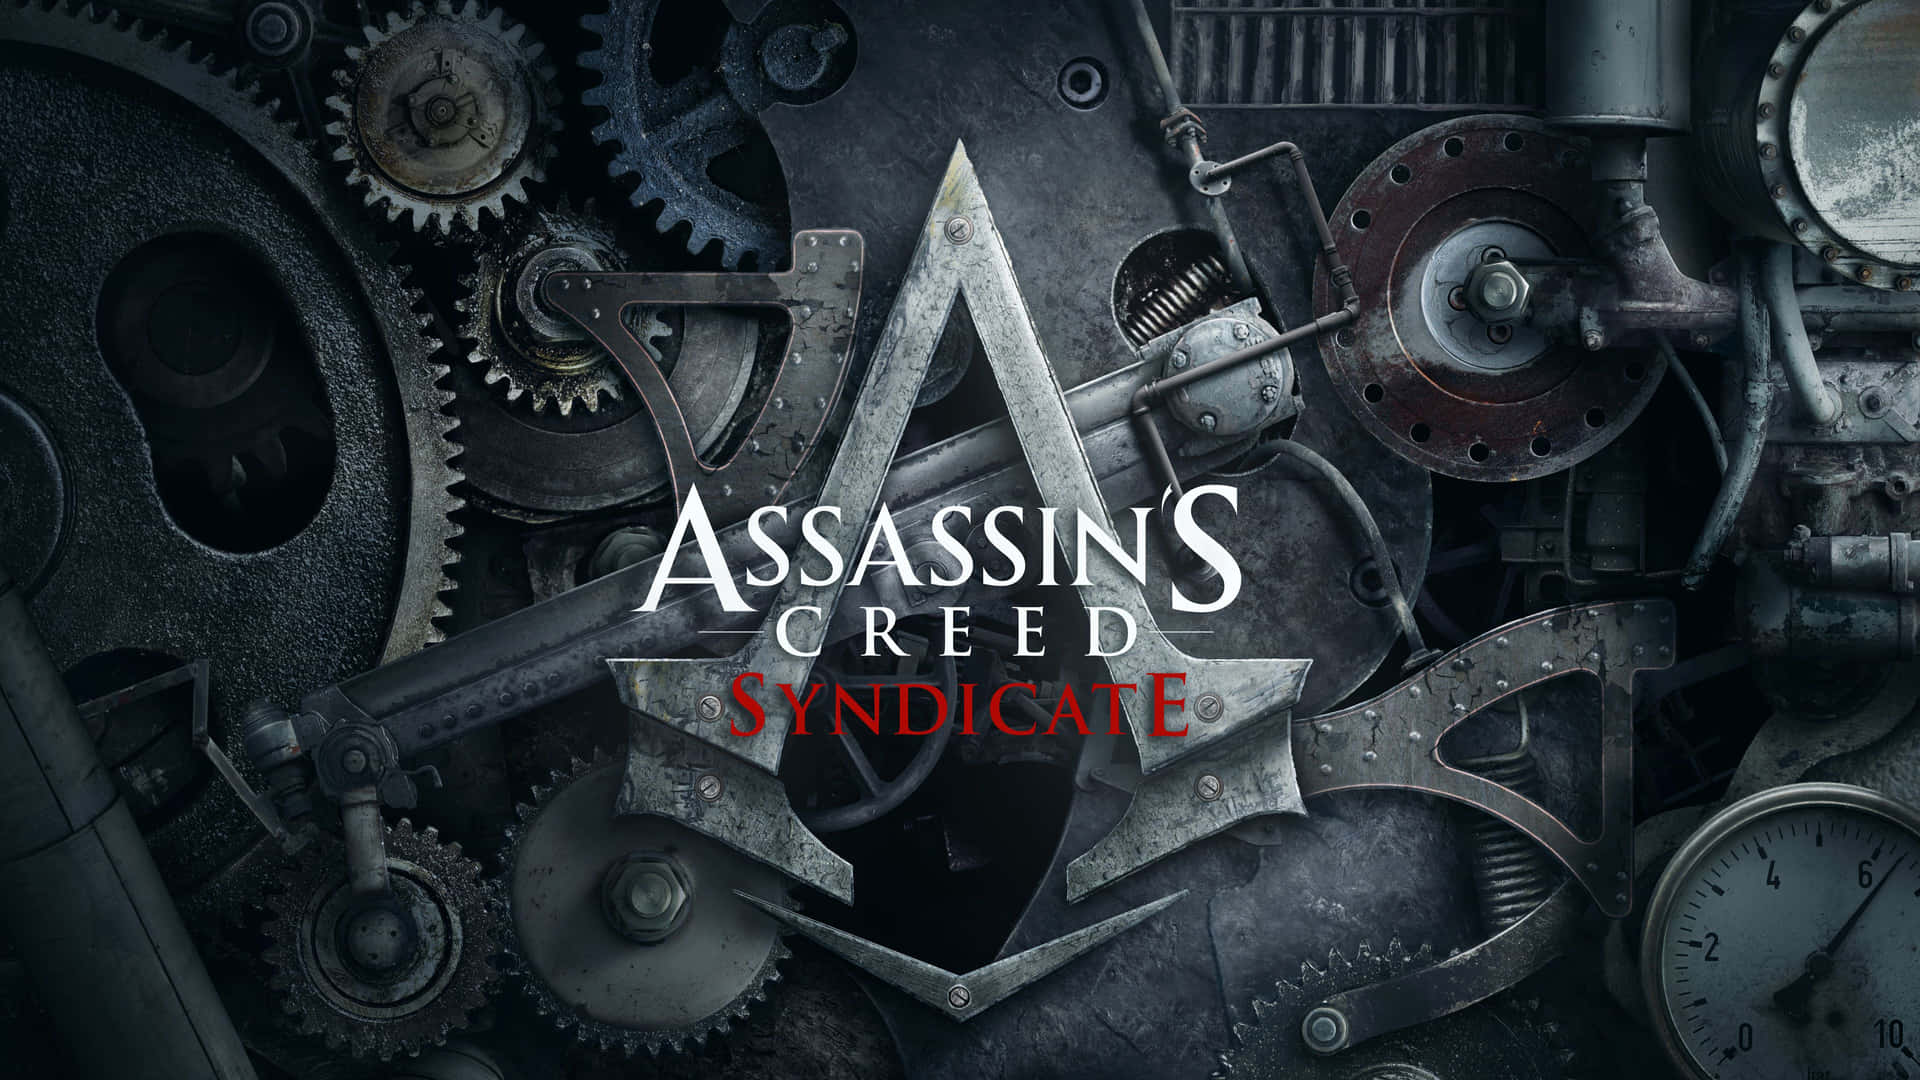 Evie and Jacob Frye in Assassin's Creed Syndicate Wallpaper